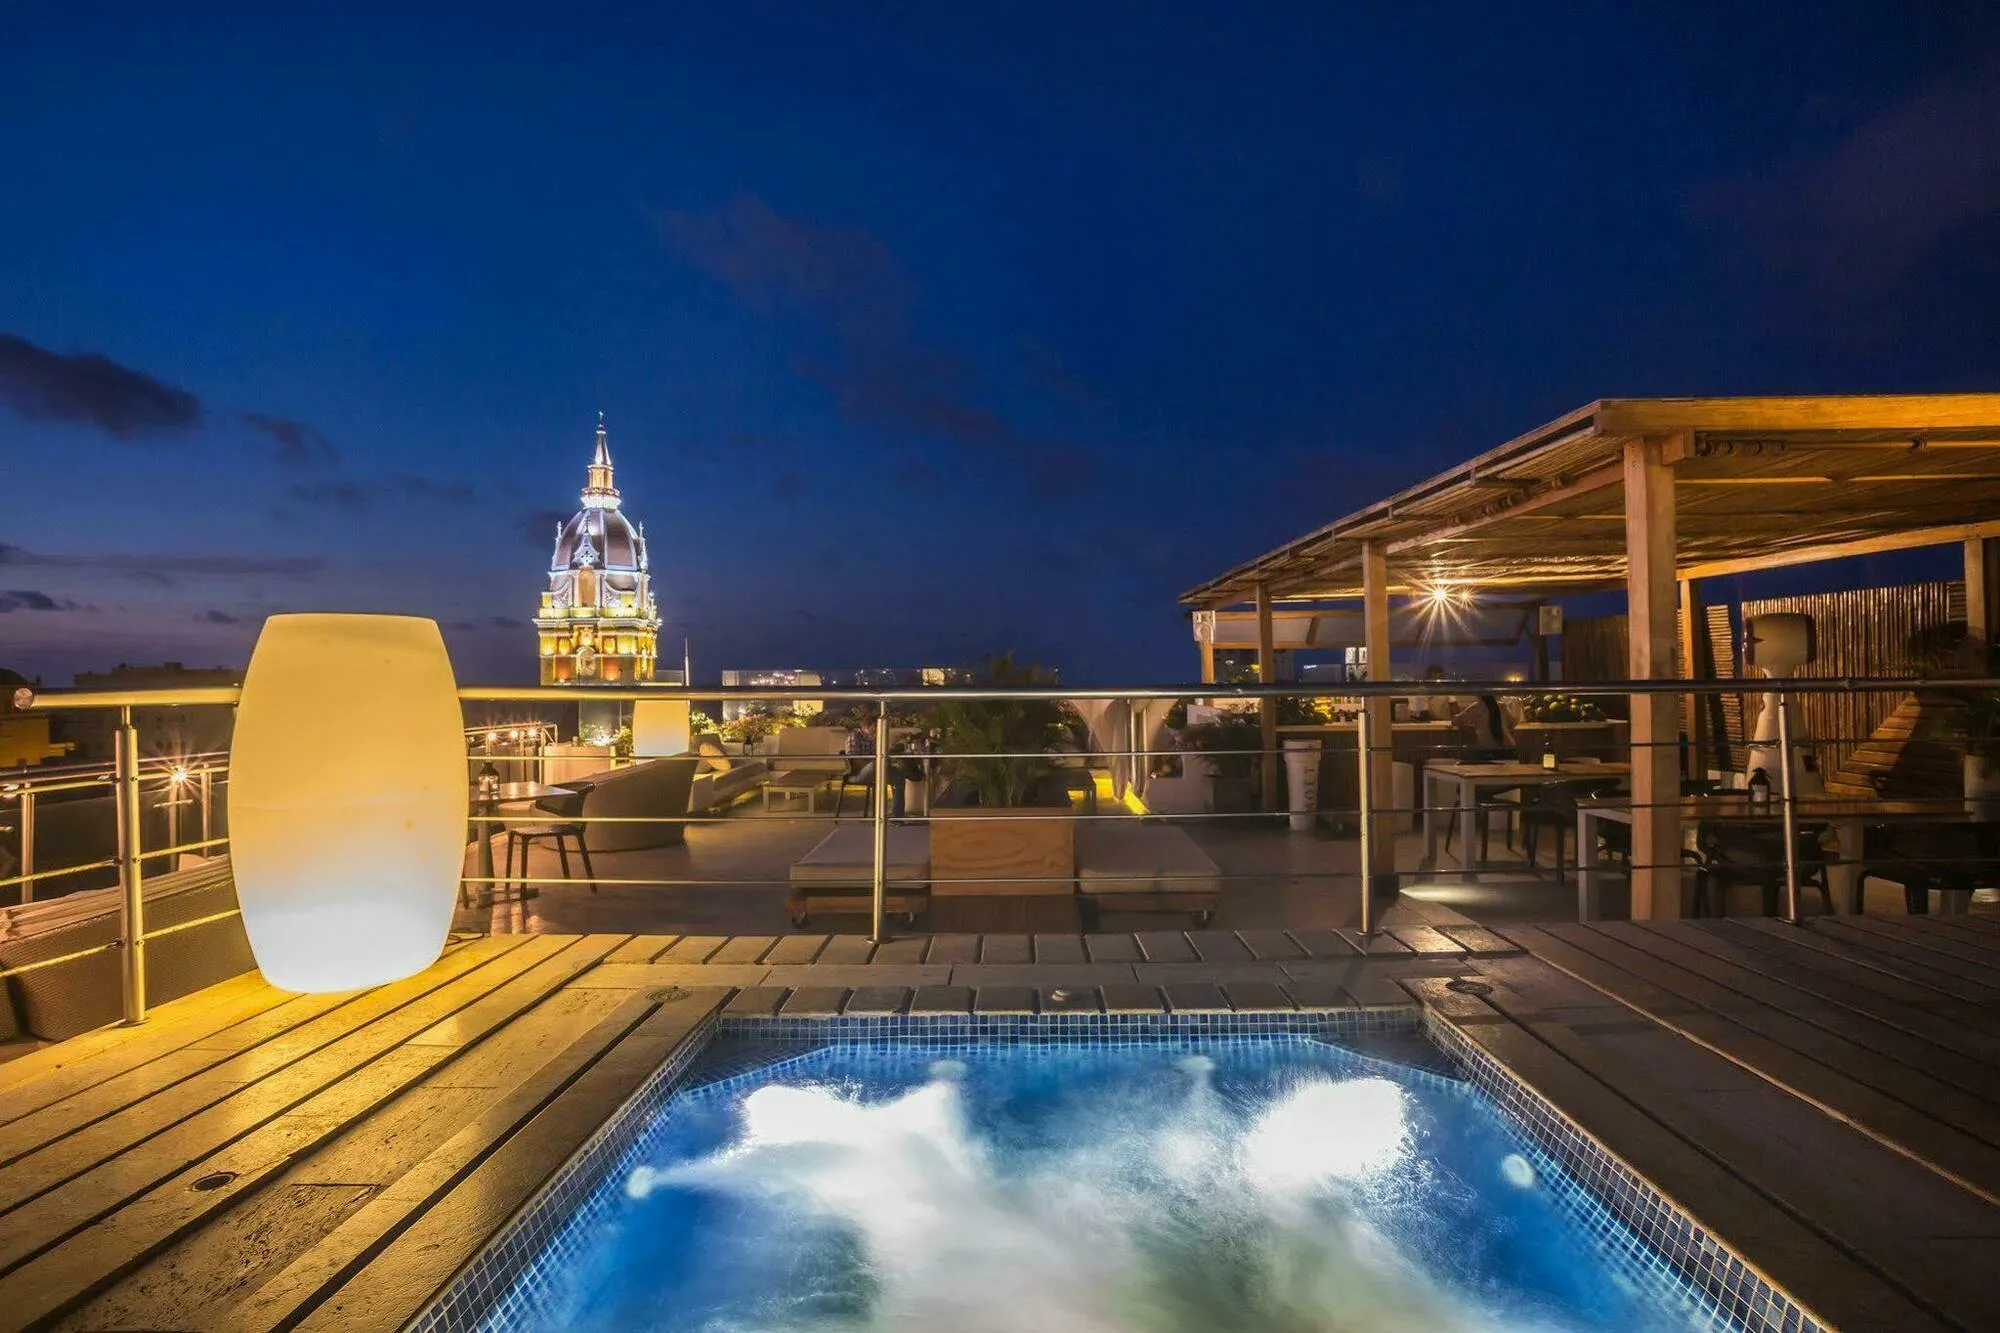 Movich Hotel Rooftop in Colombia, South America | Observation Decks,Restaurants - Rated 4